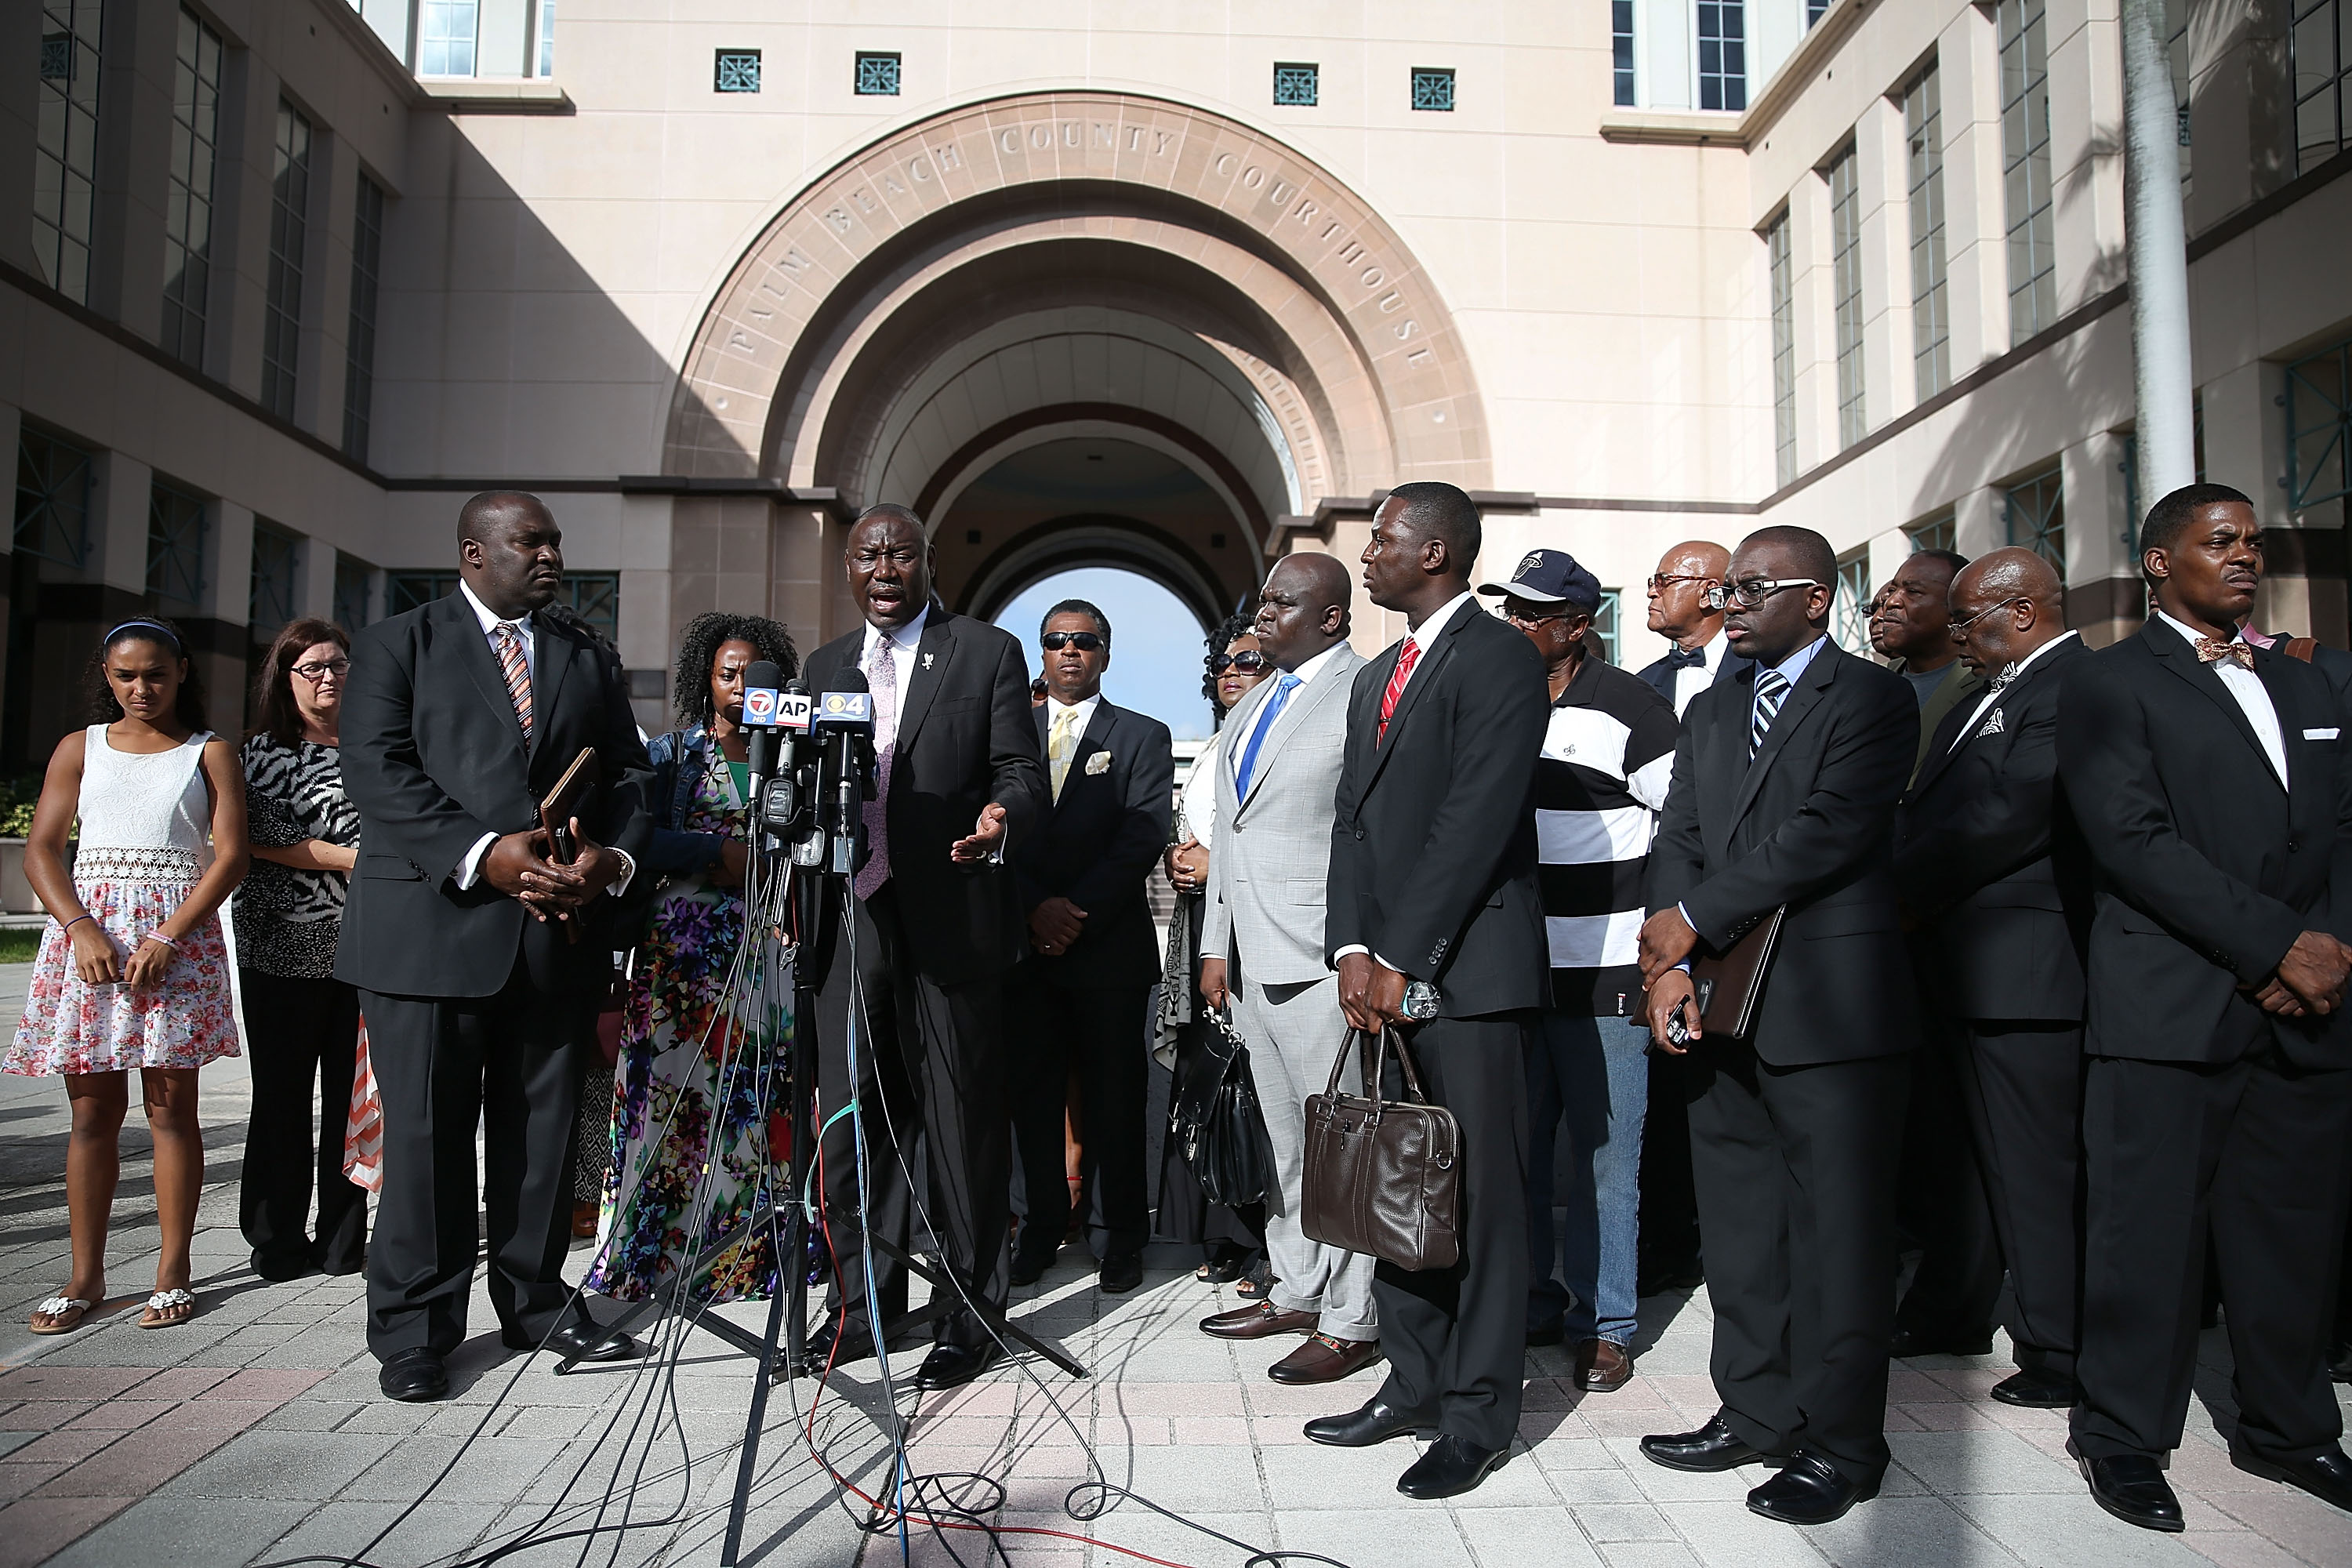 Benjamin Crump, an attorney for the Corey Jones' family, speaks to the media during a press conference to address the shooting of Mr. Jones, in West Palm Beach, Florida, on Oct. 22, 2015. (Joe Raedle—Getty Images)